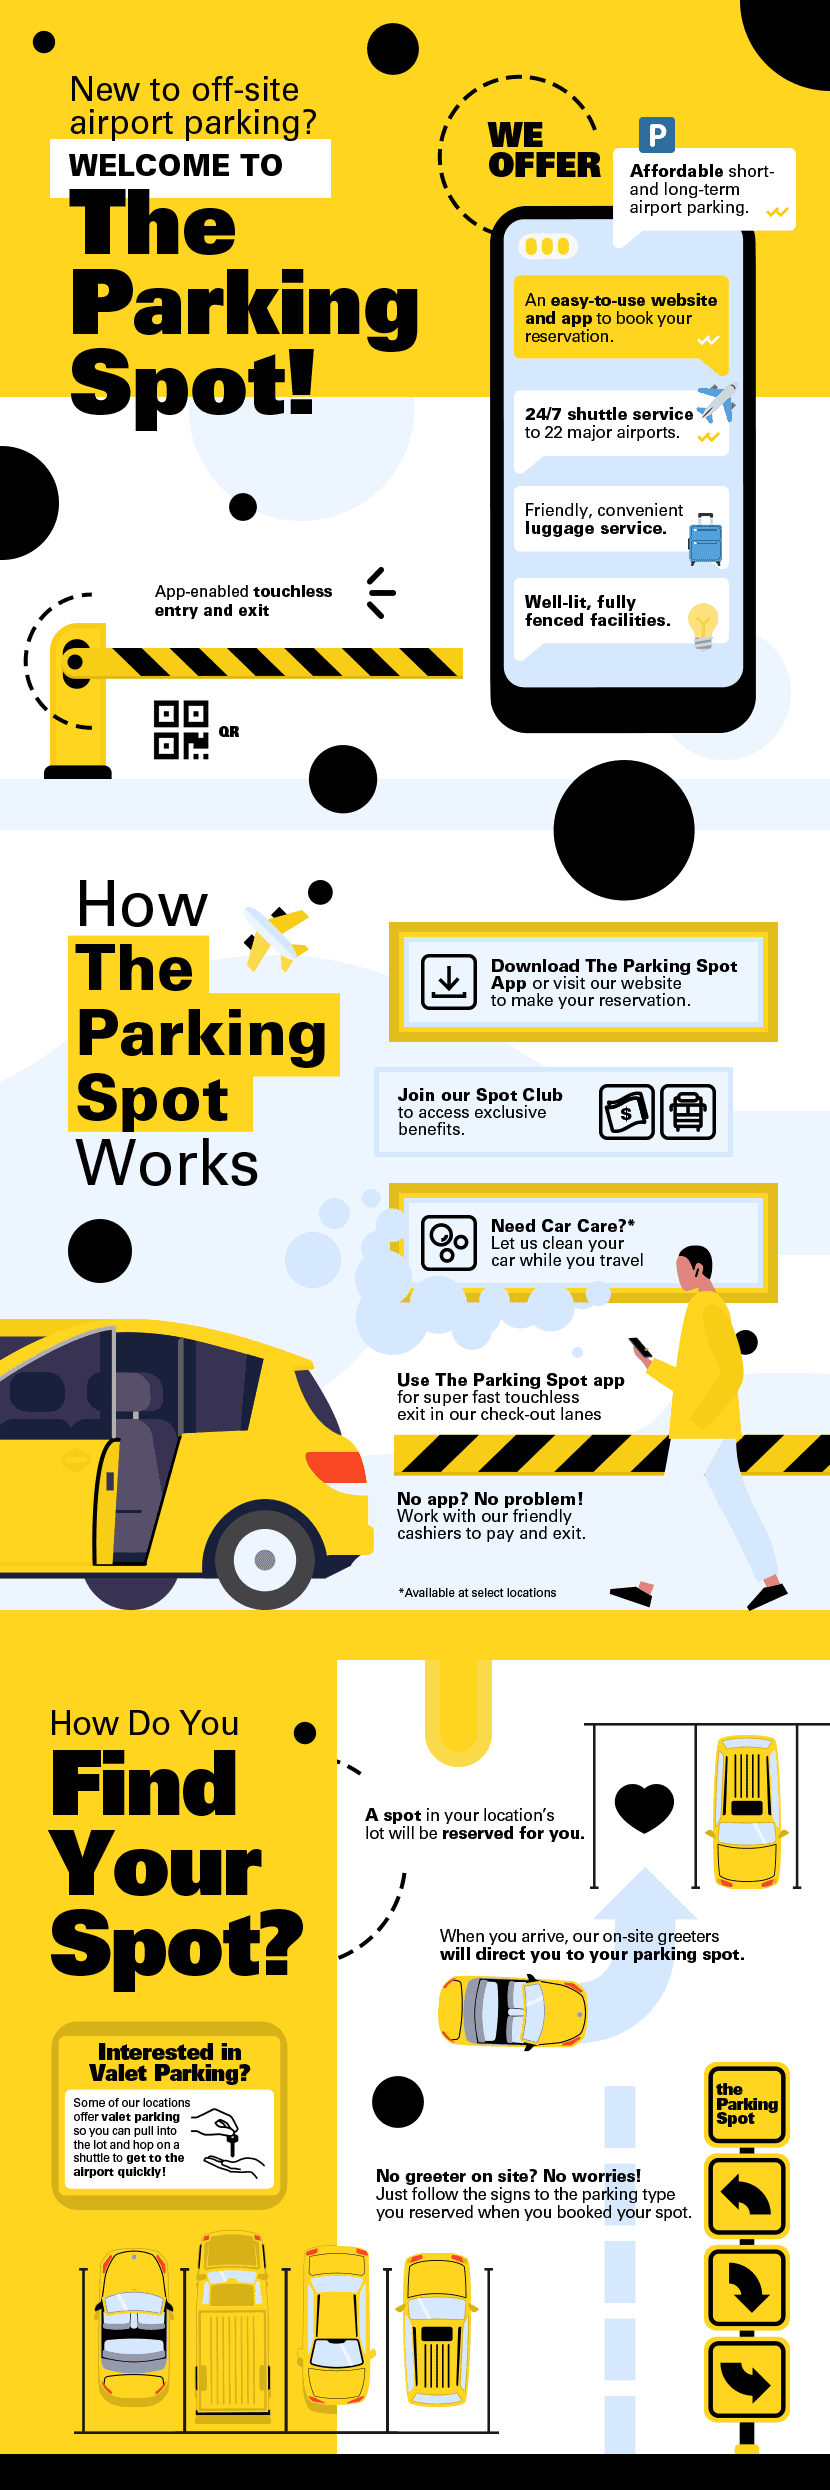 infographic explaining The Parking Spot services also described in text below